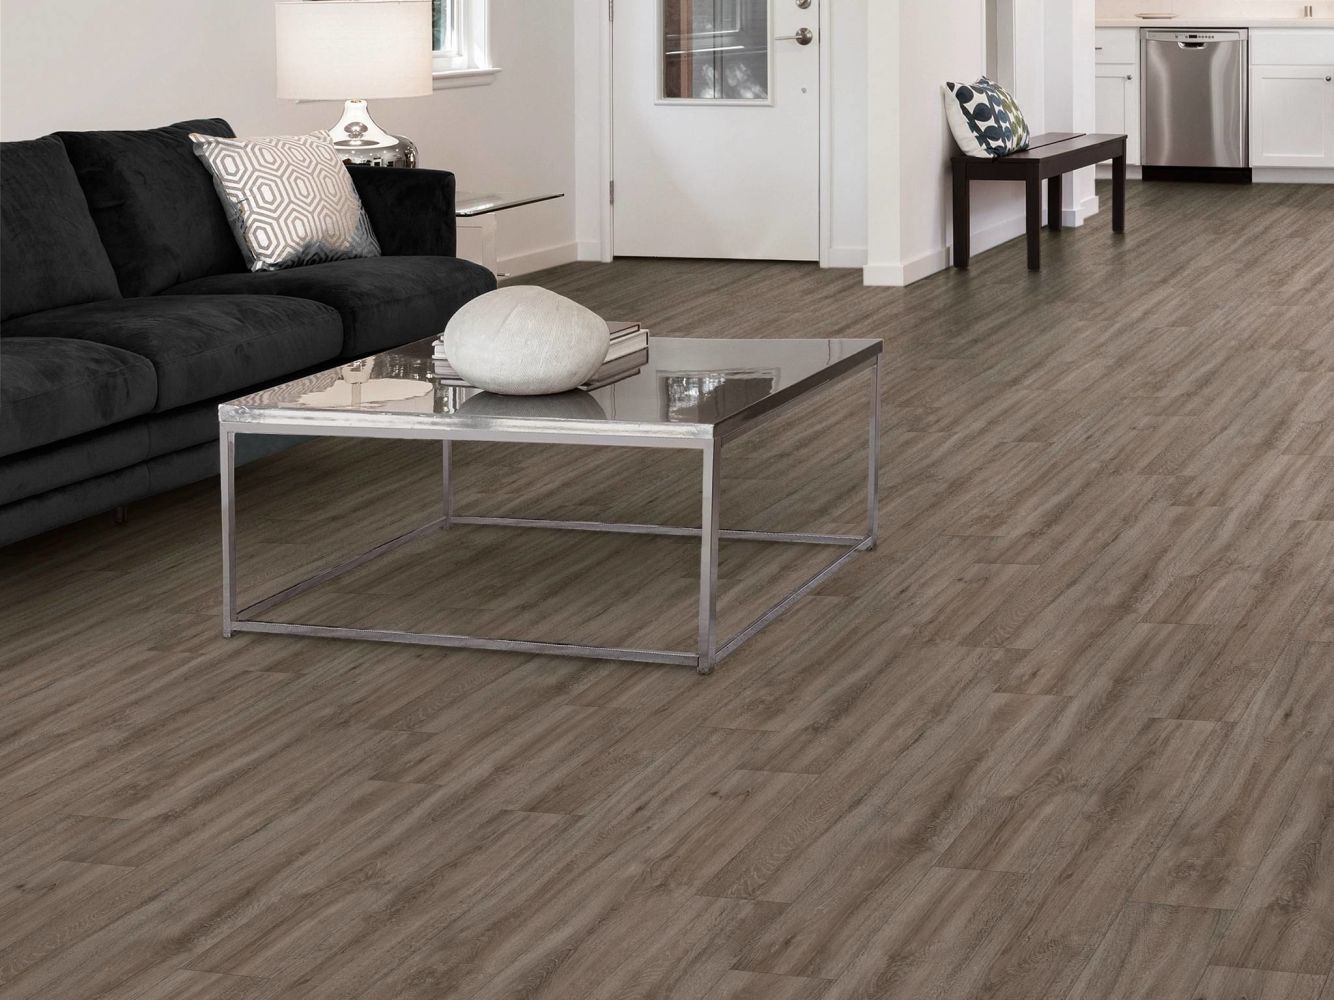 Shaw Floors Resilient Residential Artemis Chariot 05006_3037V